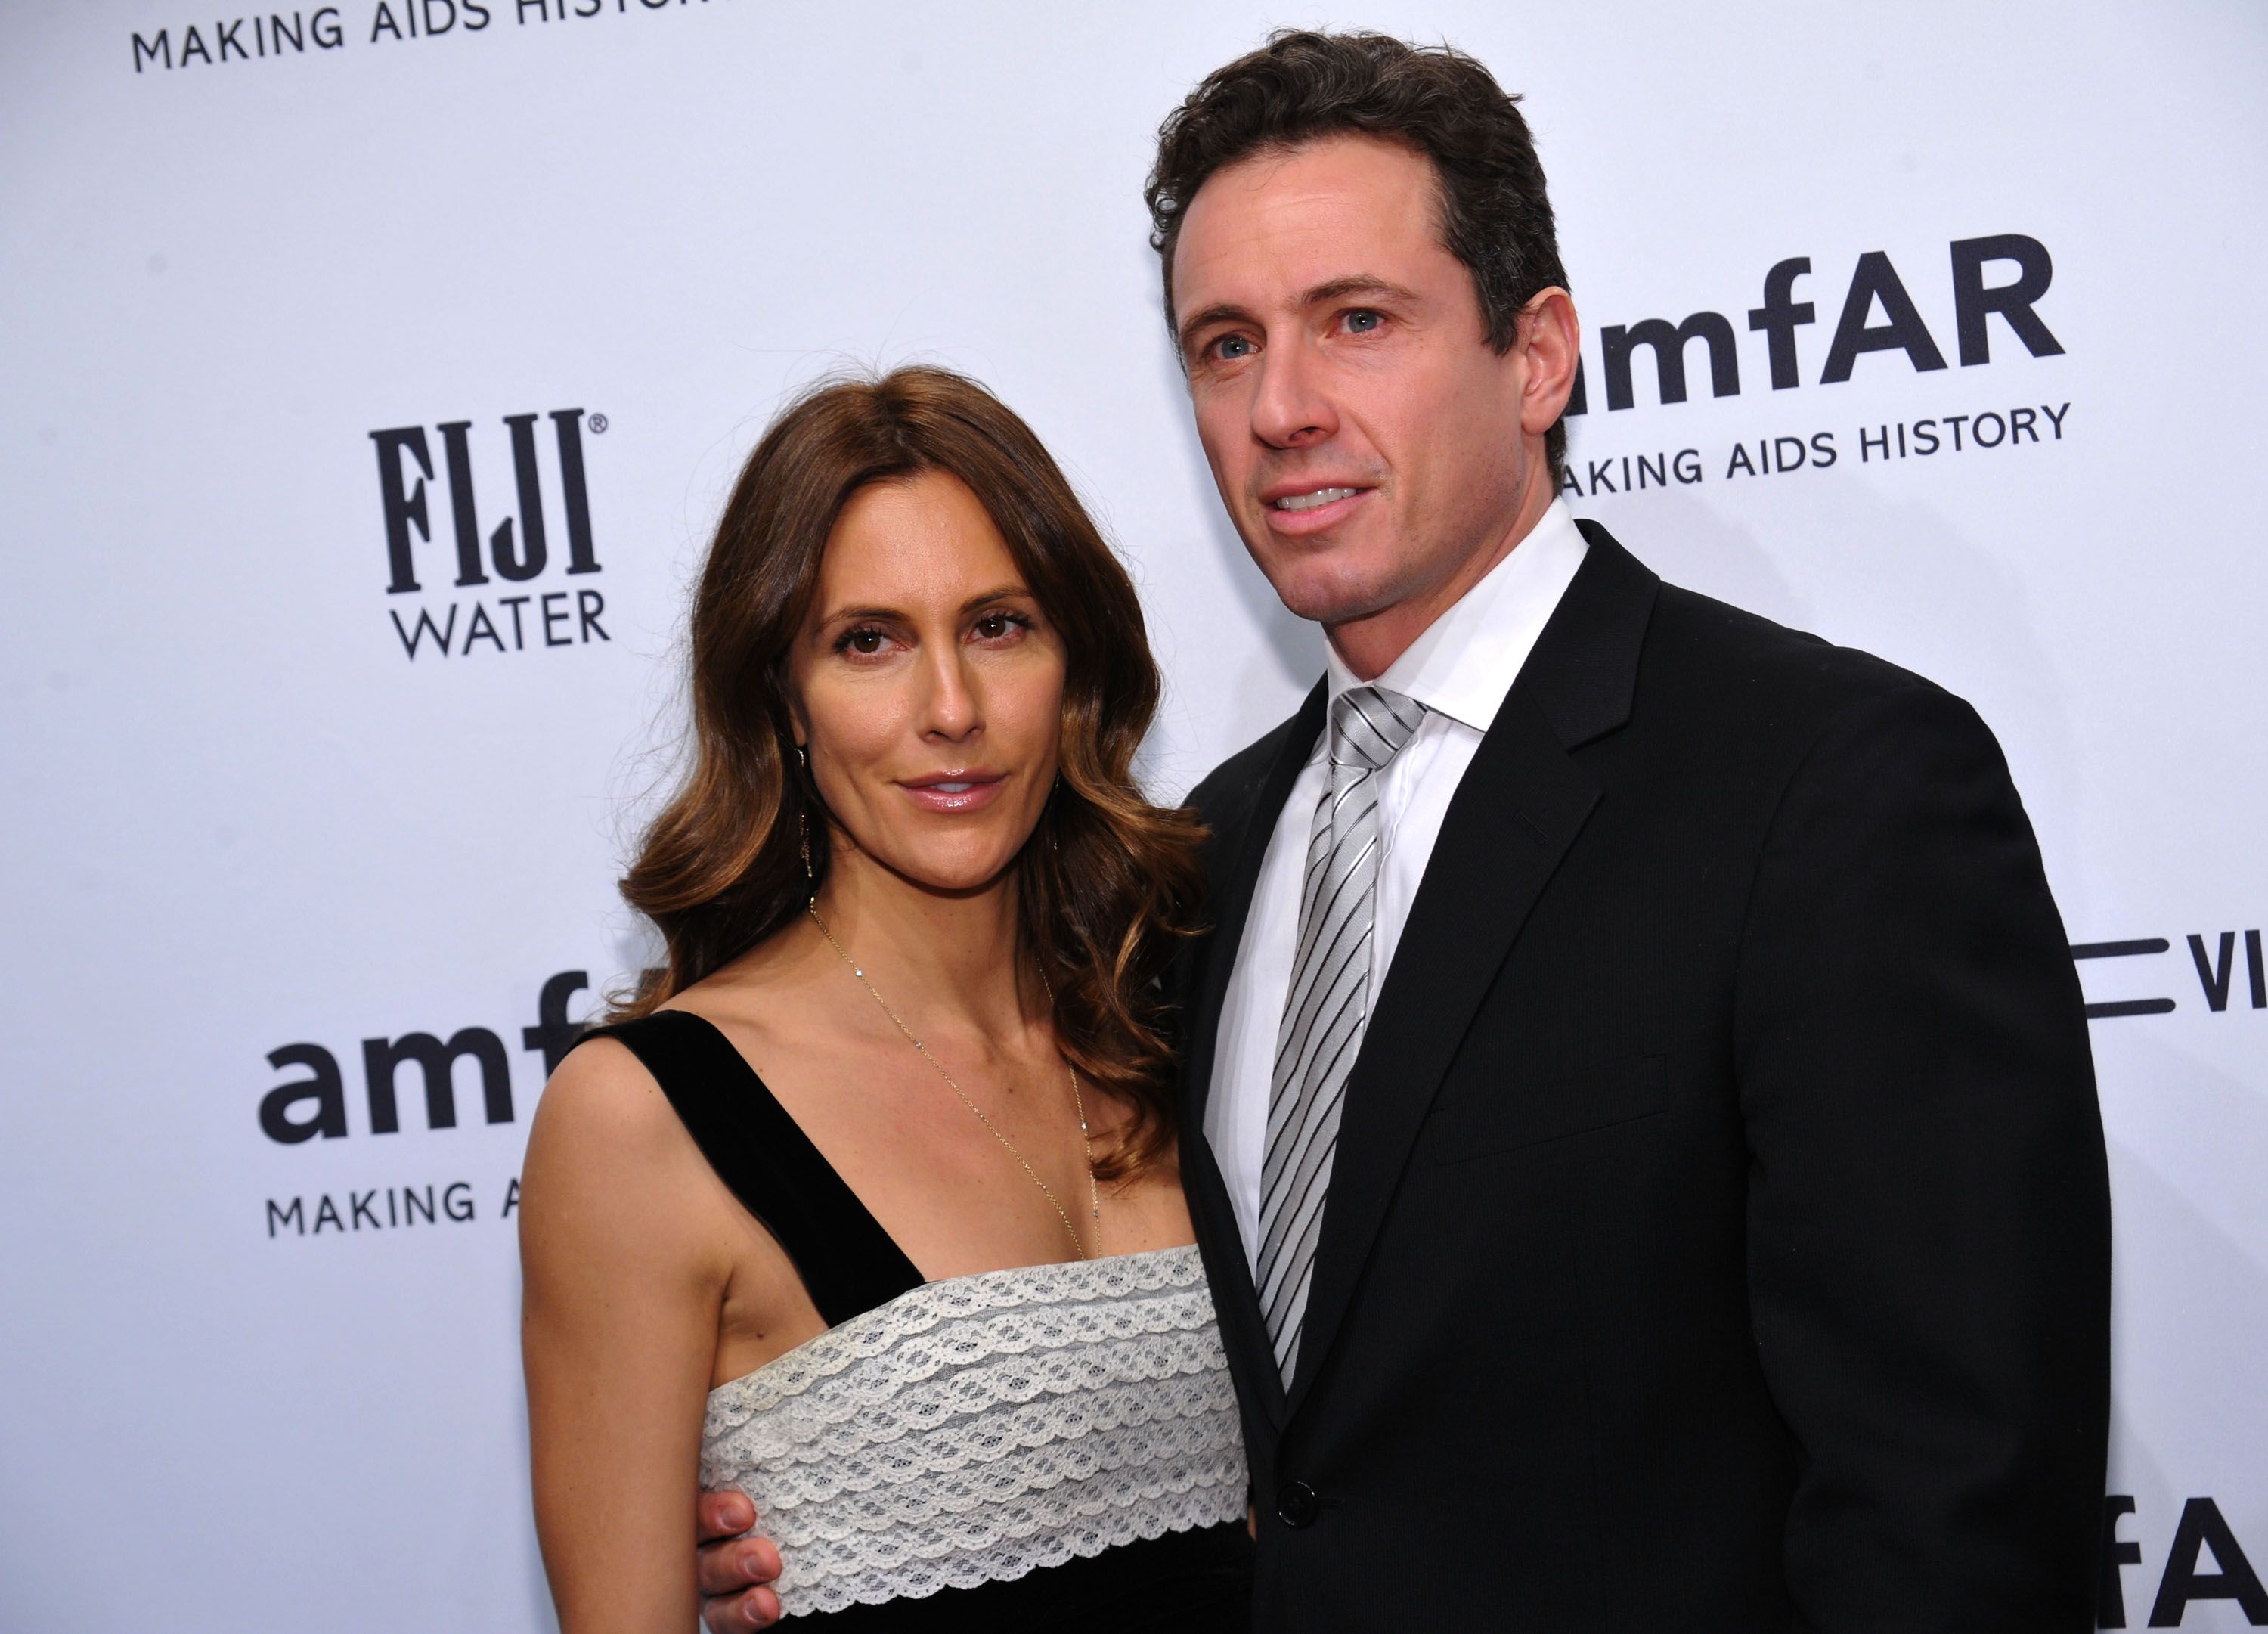 Cristina Cuomo and Chris Cuomo attend the amfAR New York Gala for Fall 2013 Fashion Week at Cipriani Wall Street on February 6, 2013 in New York City. | Photo: Getty Images